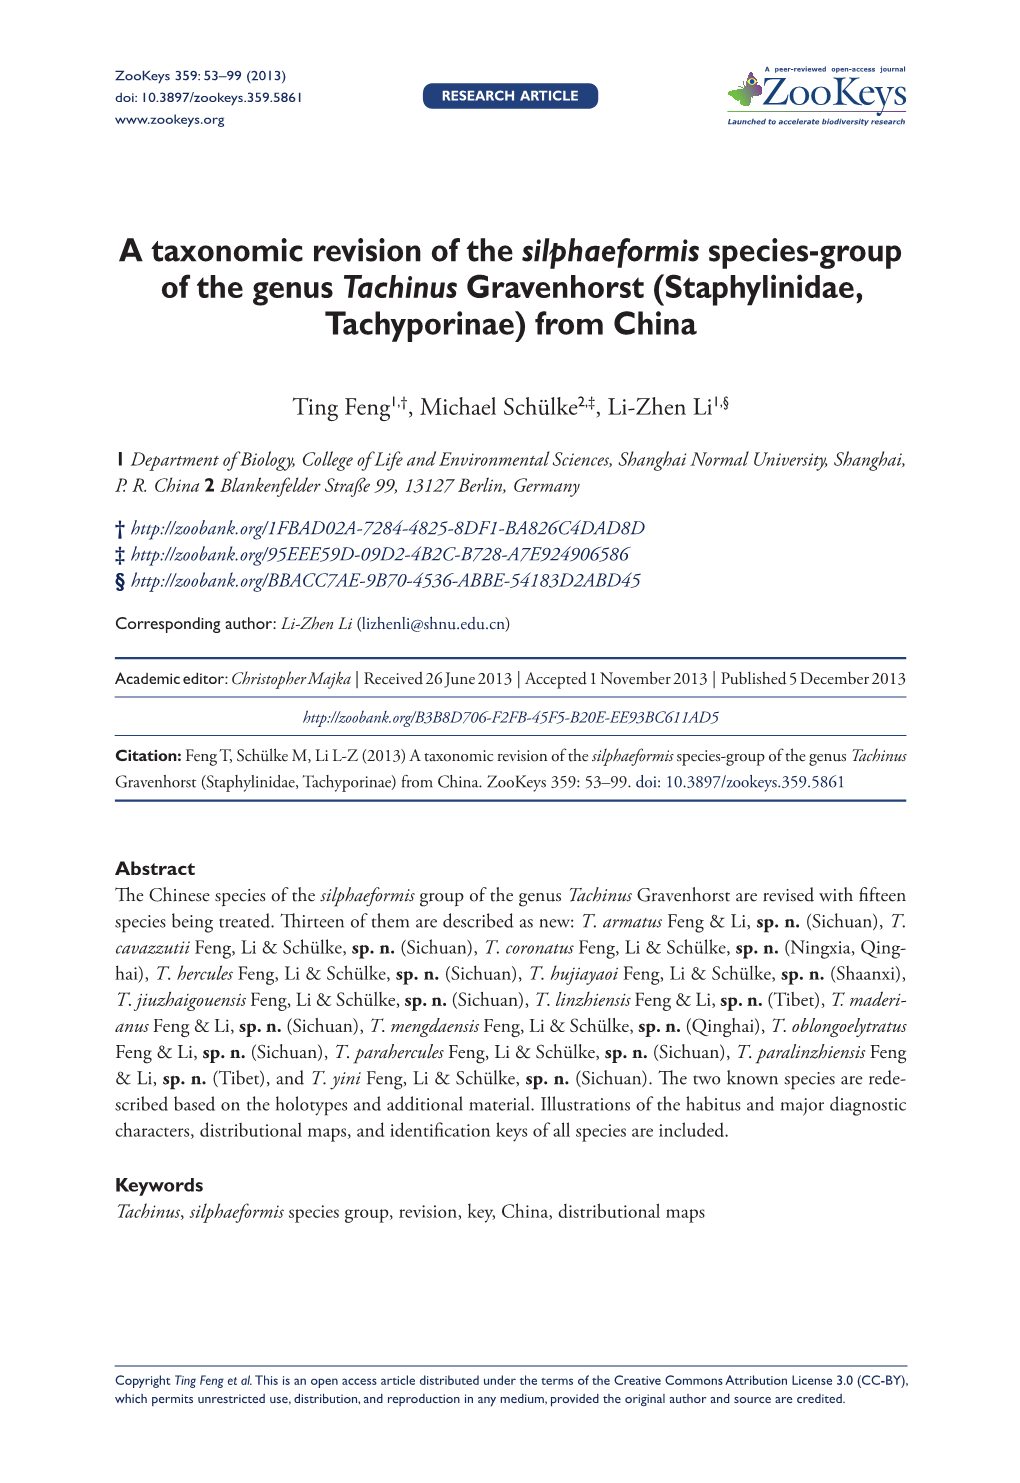 A Taxonomic Revision of the Silphaeformis Species-Group of the Genus Tachinus Gravenhorst (Staphylinidae, Tachyporinae) from China